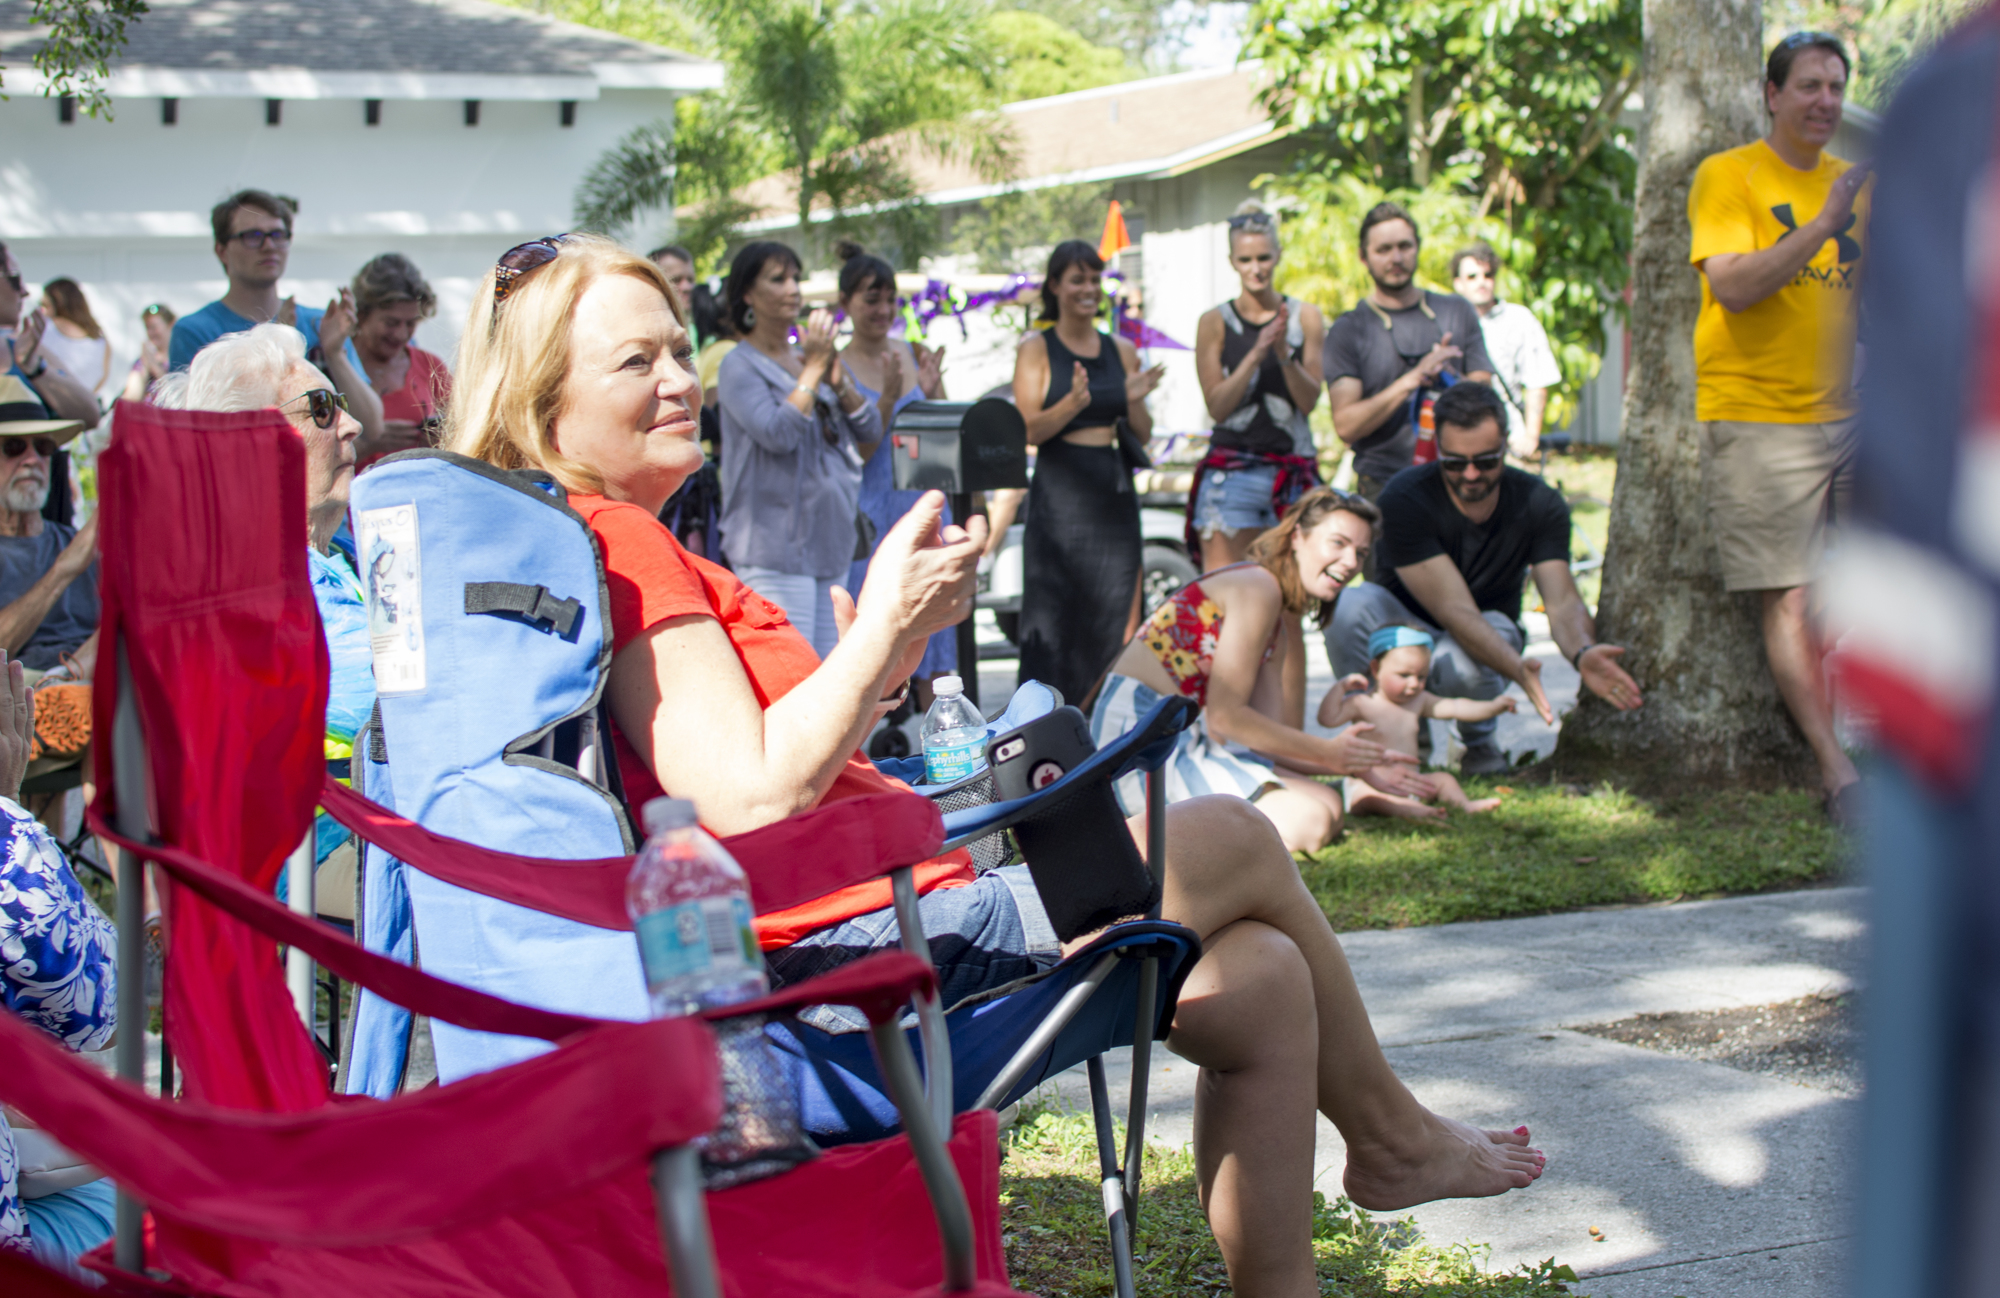 Linda Hartman applauds after a performance during the second annual Arlington Park Porchfest.